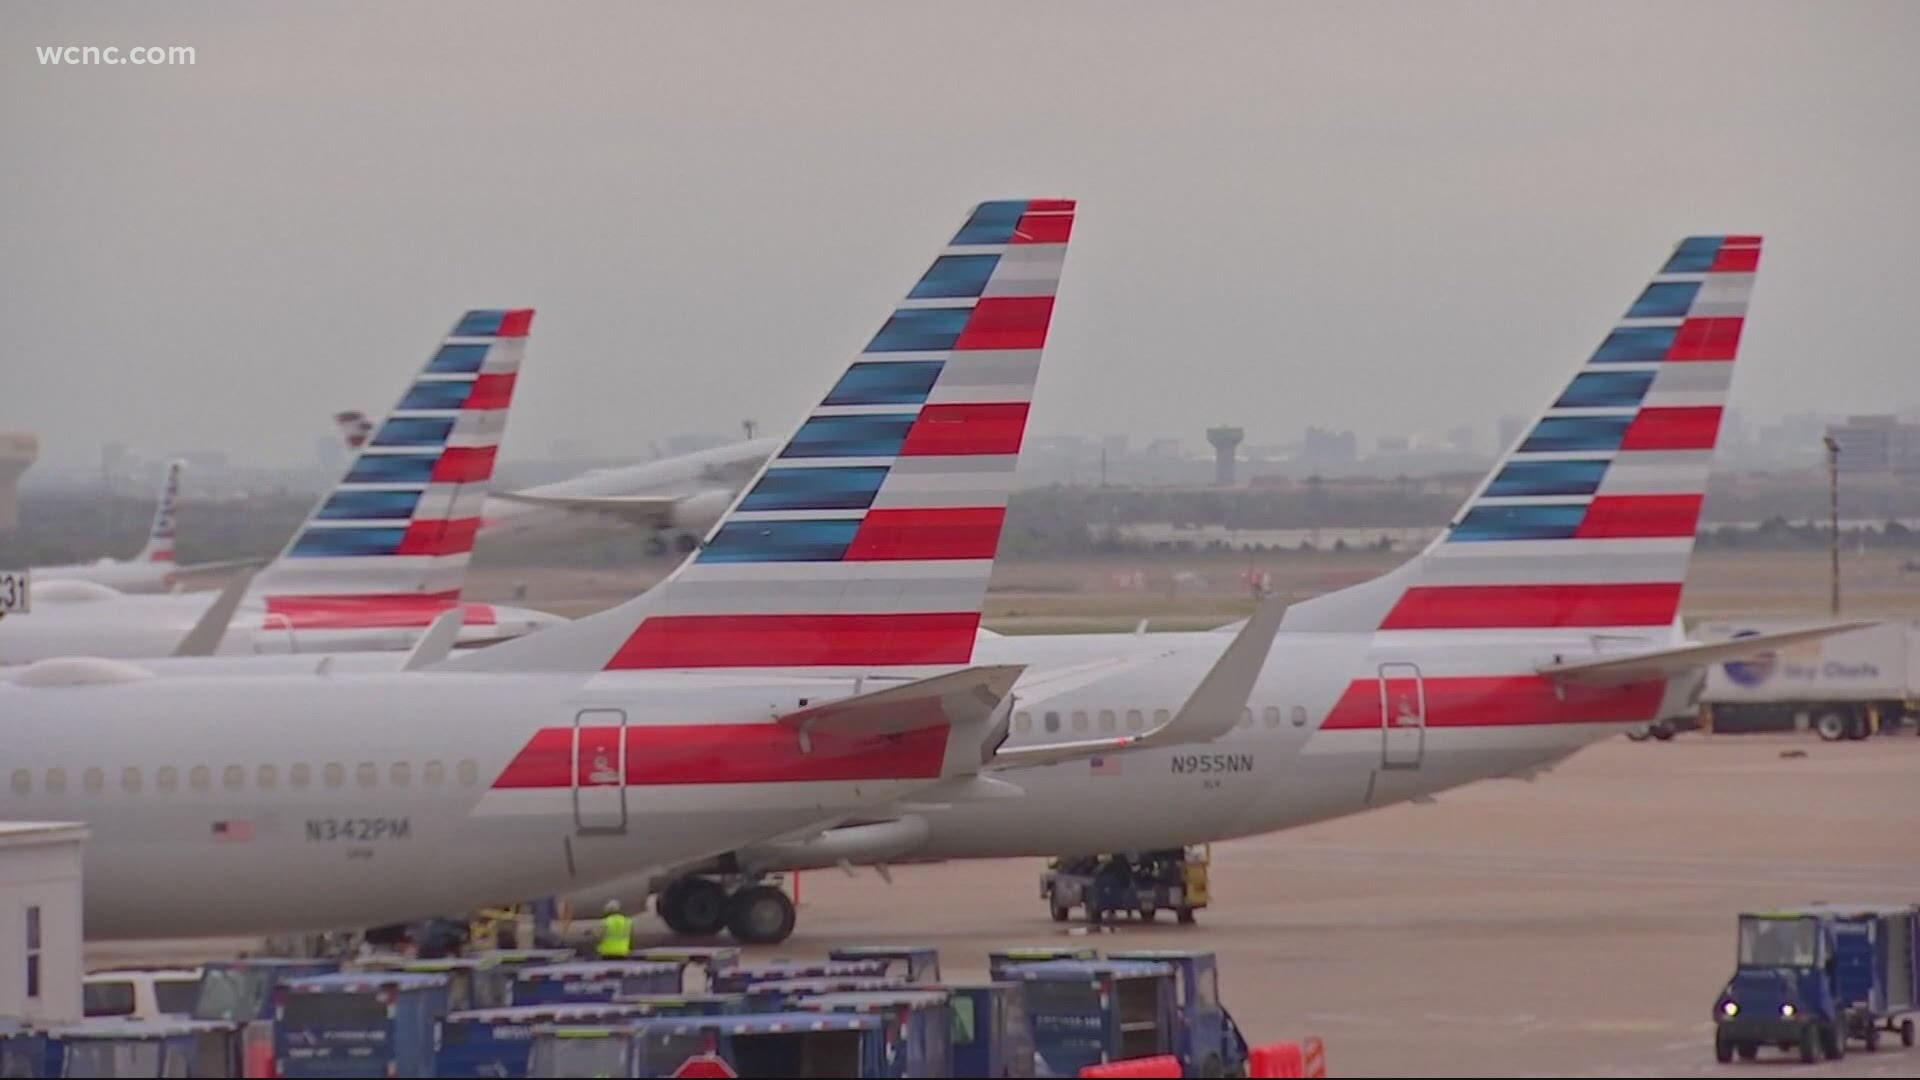 Two long-haul flights out of CLT have been impacted due to the fuel supply shortage.